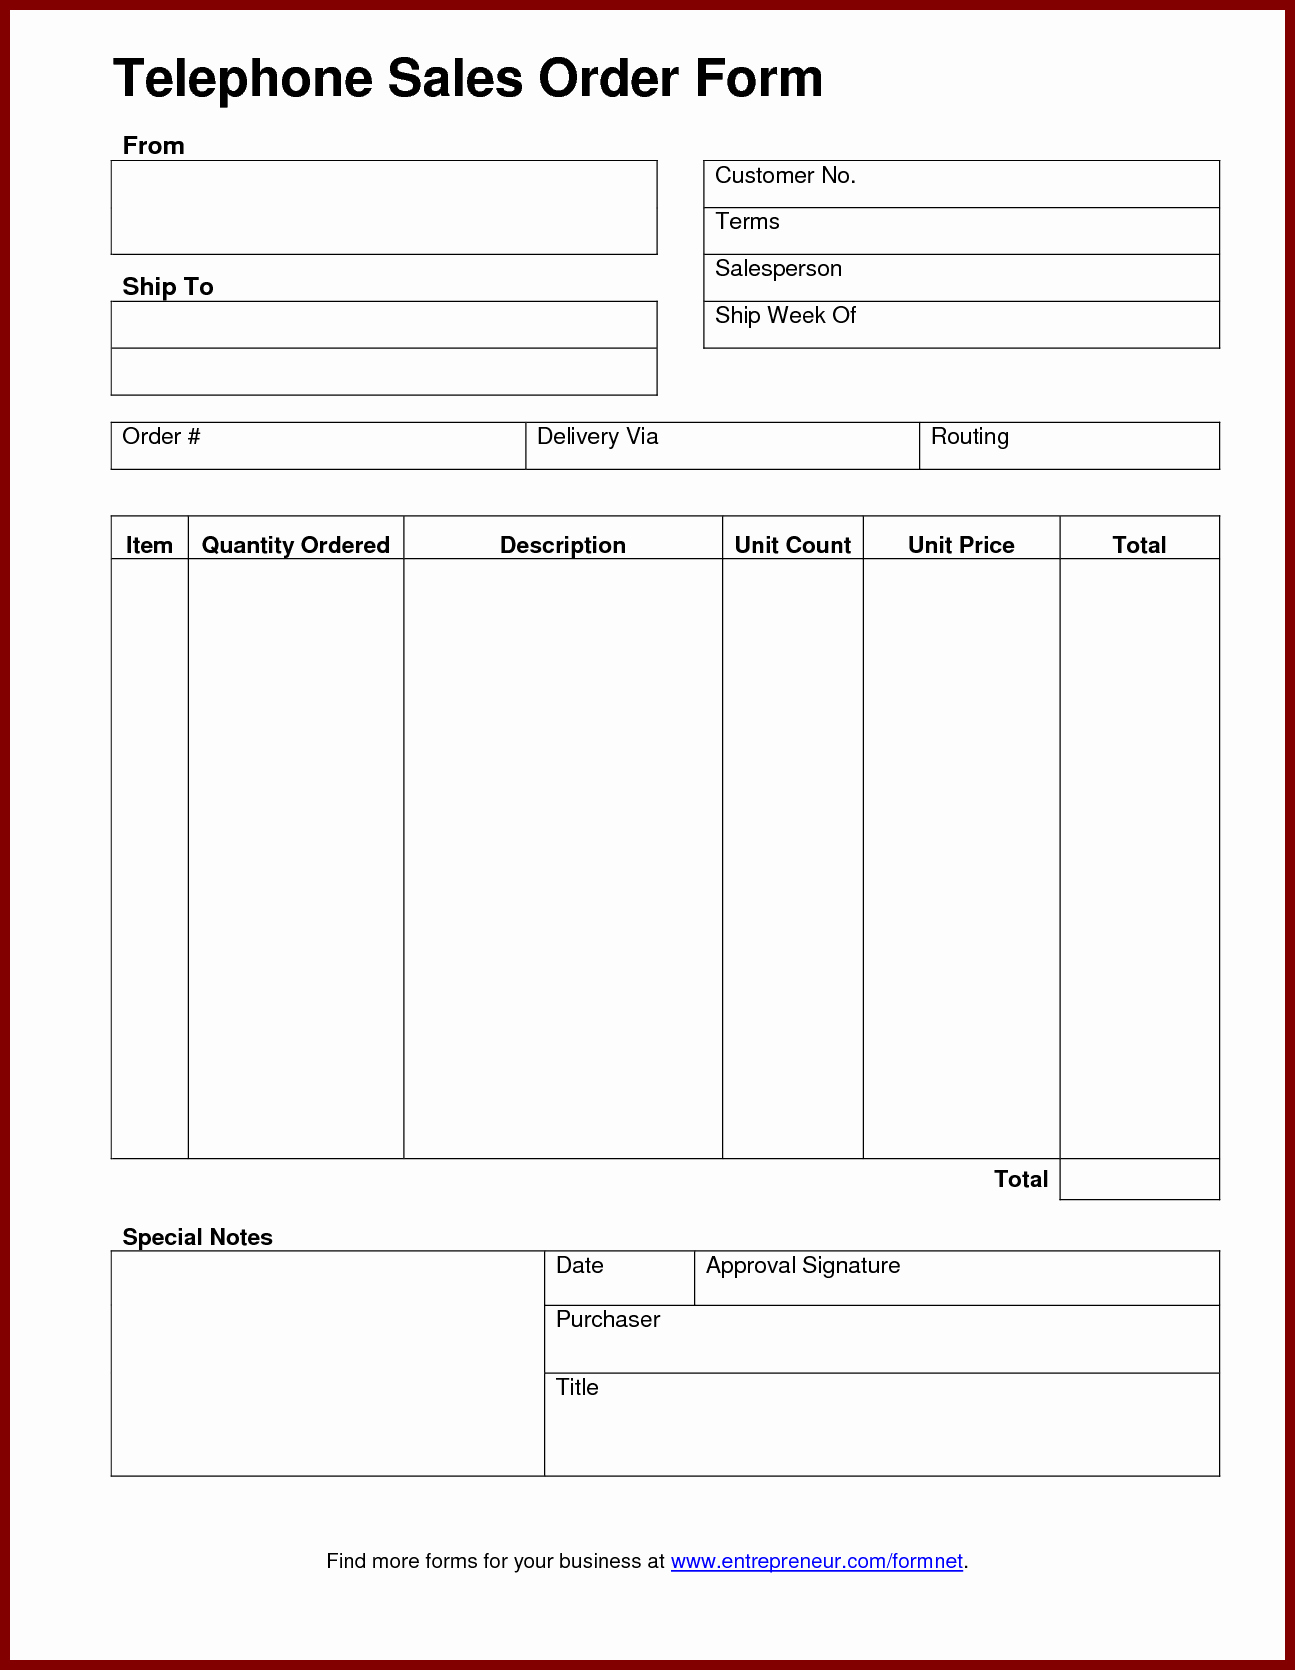 Sales order form Template Luxury Delivery order Template Bamboodownunder